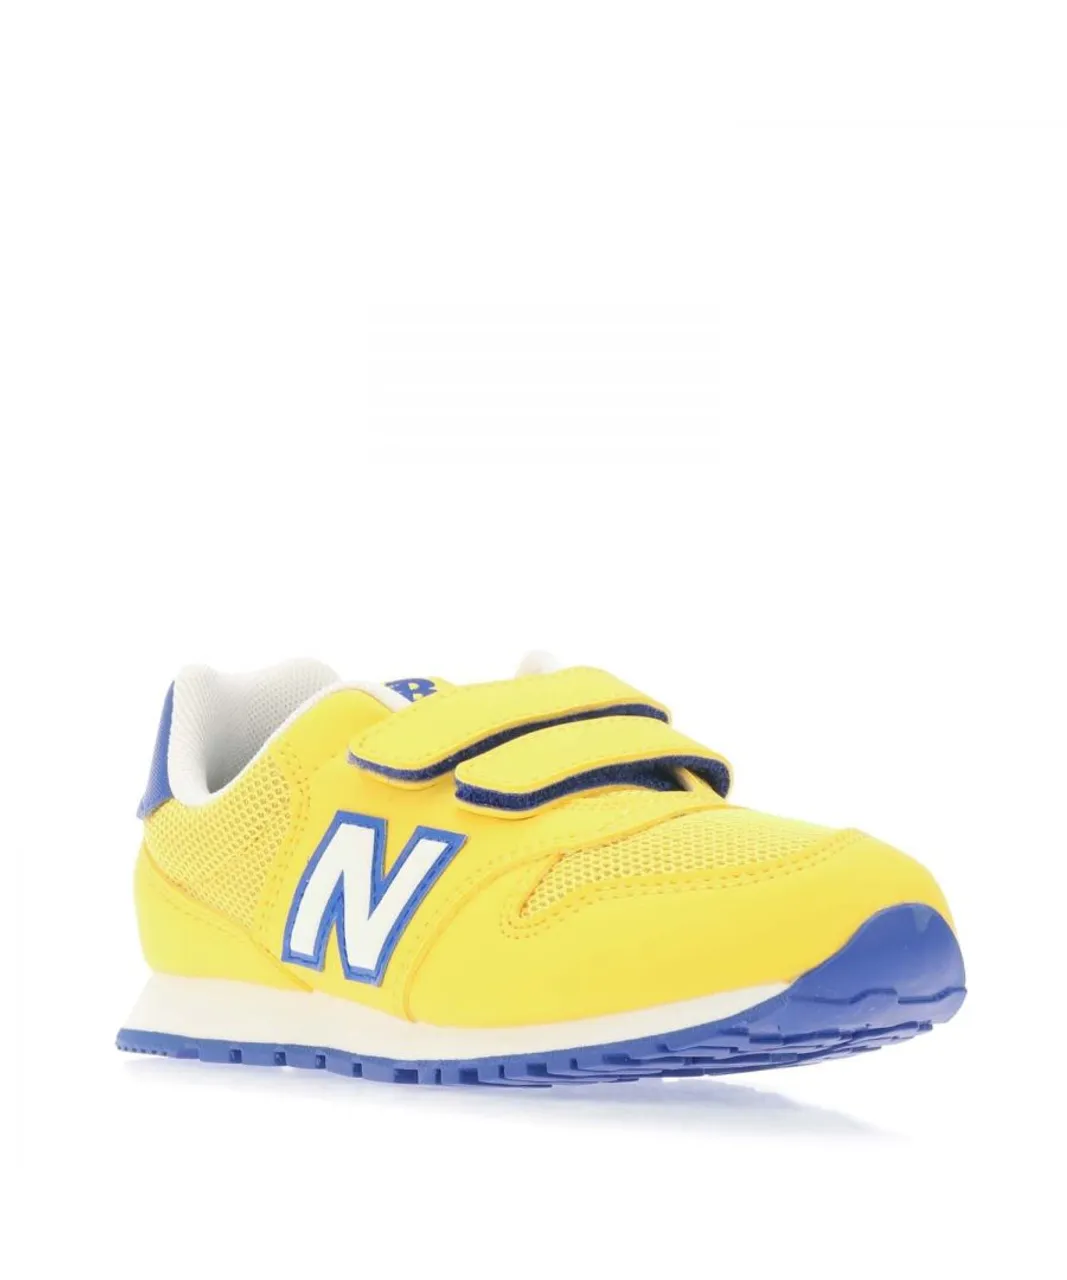 New Balance Boys Boy's Kids 500 Hook And Loop Trainers in Yellow